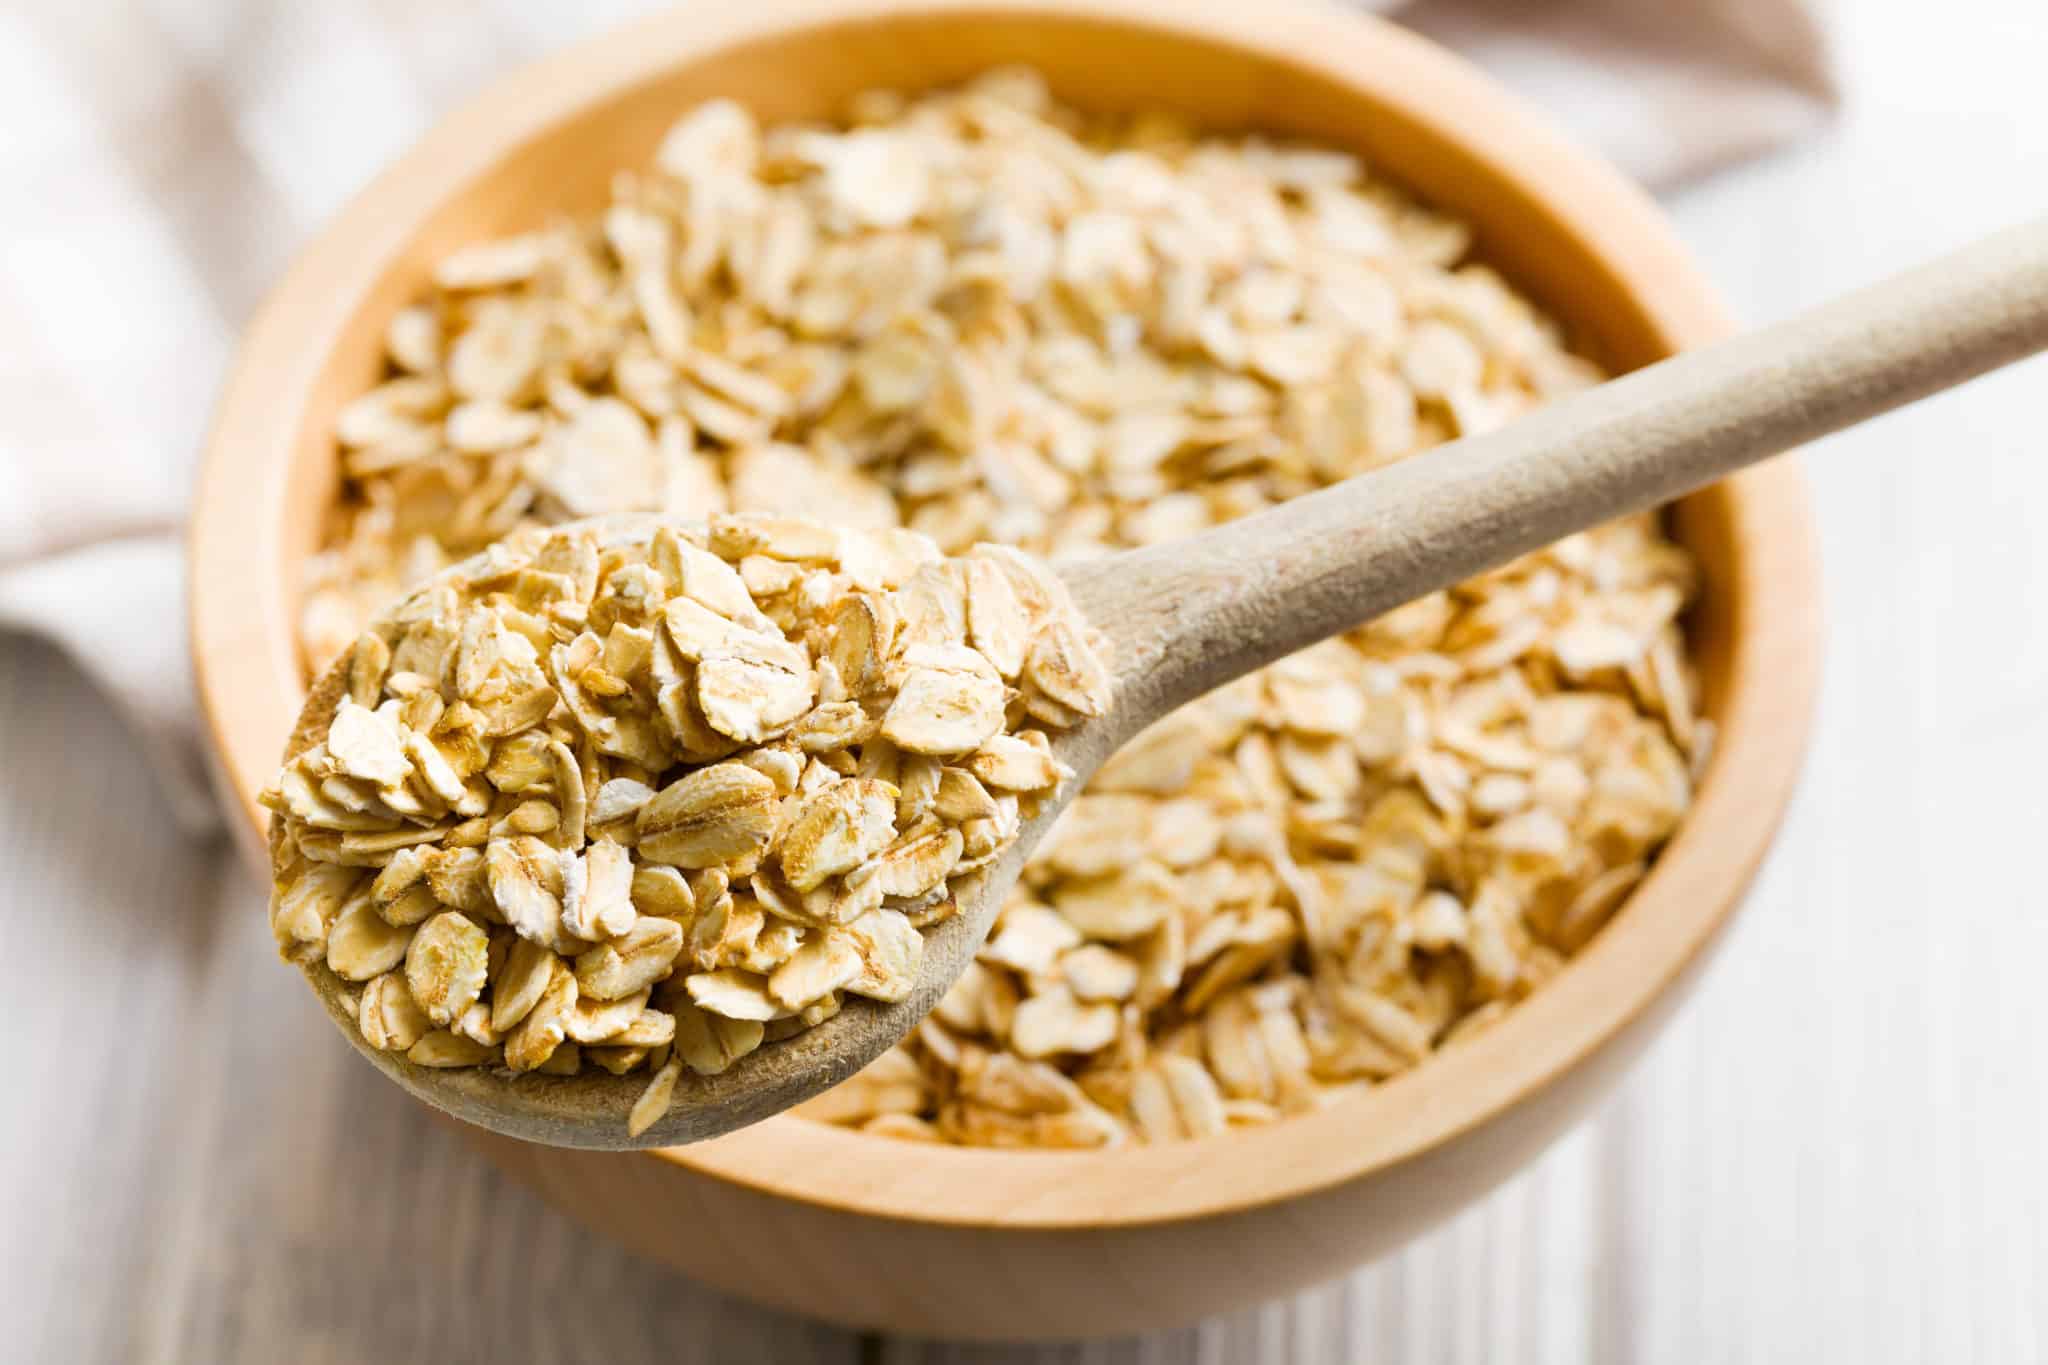 Bowl of oats with spoon